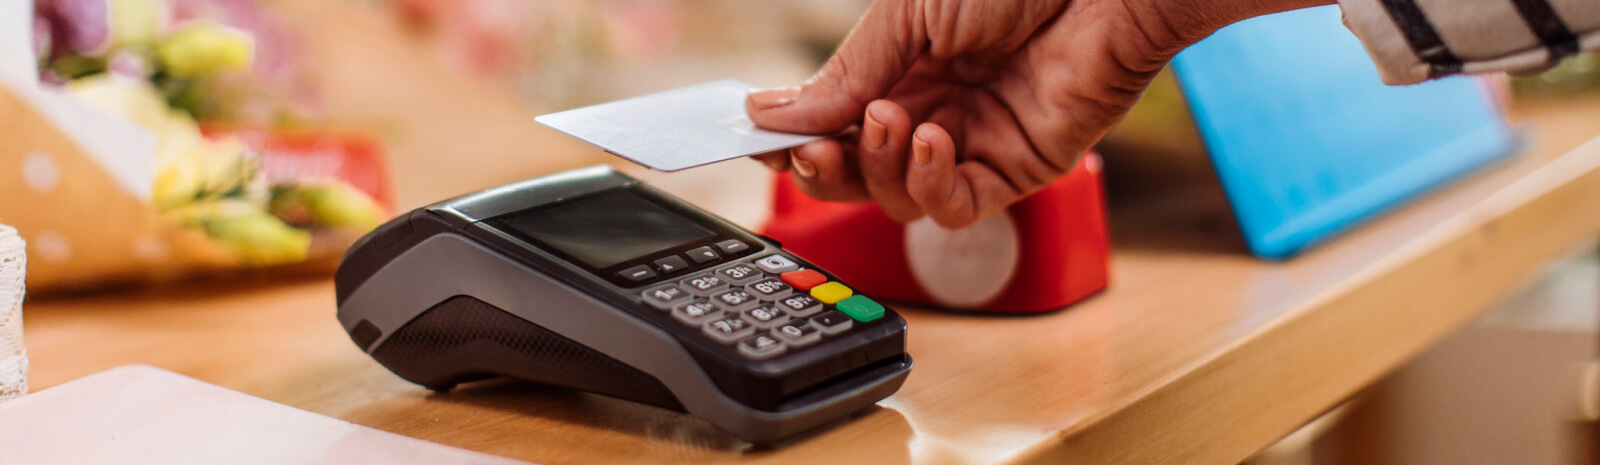 Close up of a hand holding a credit card against a card reader